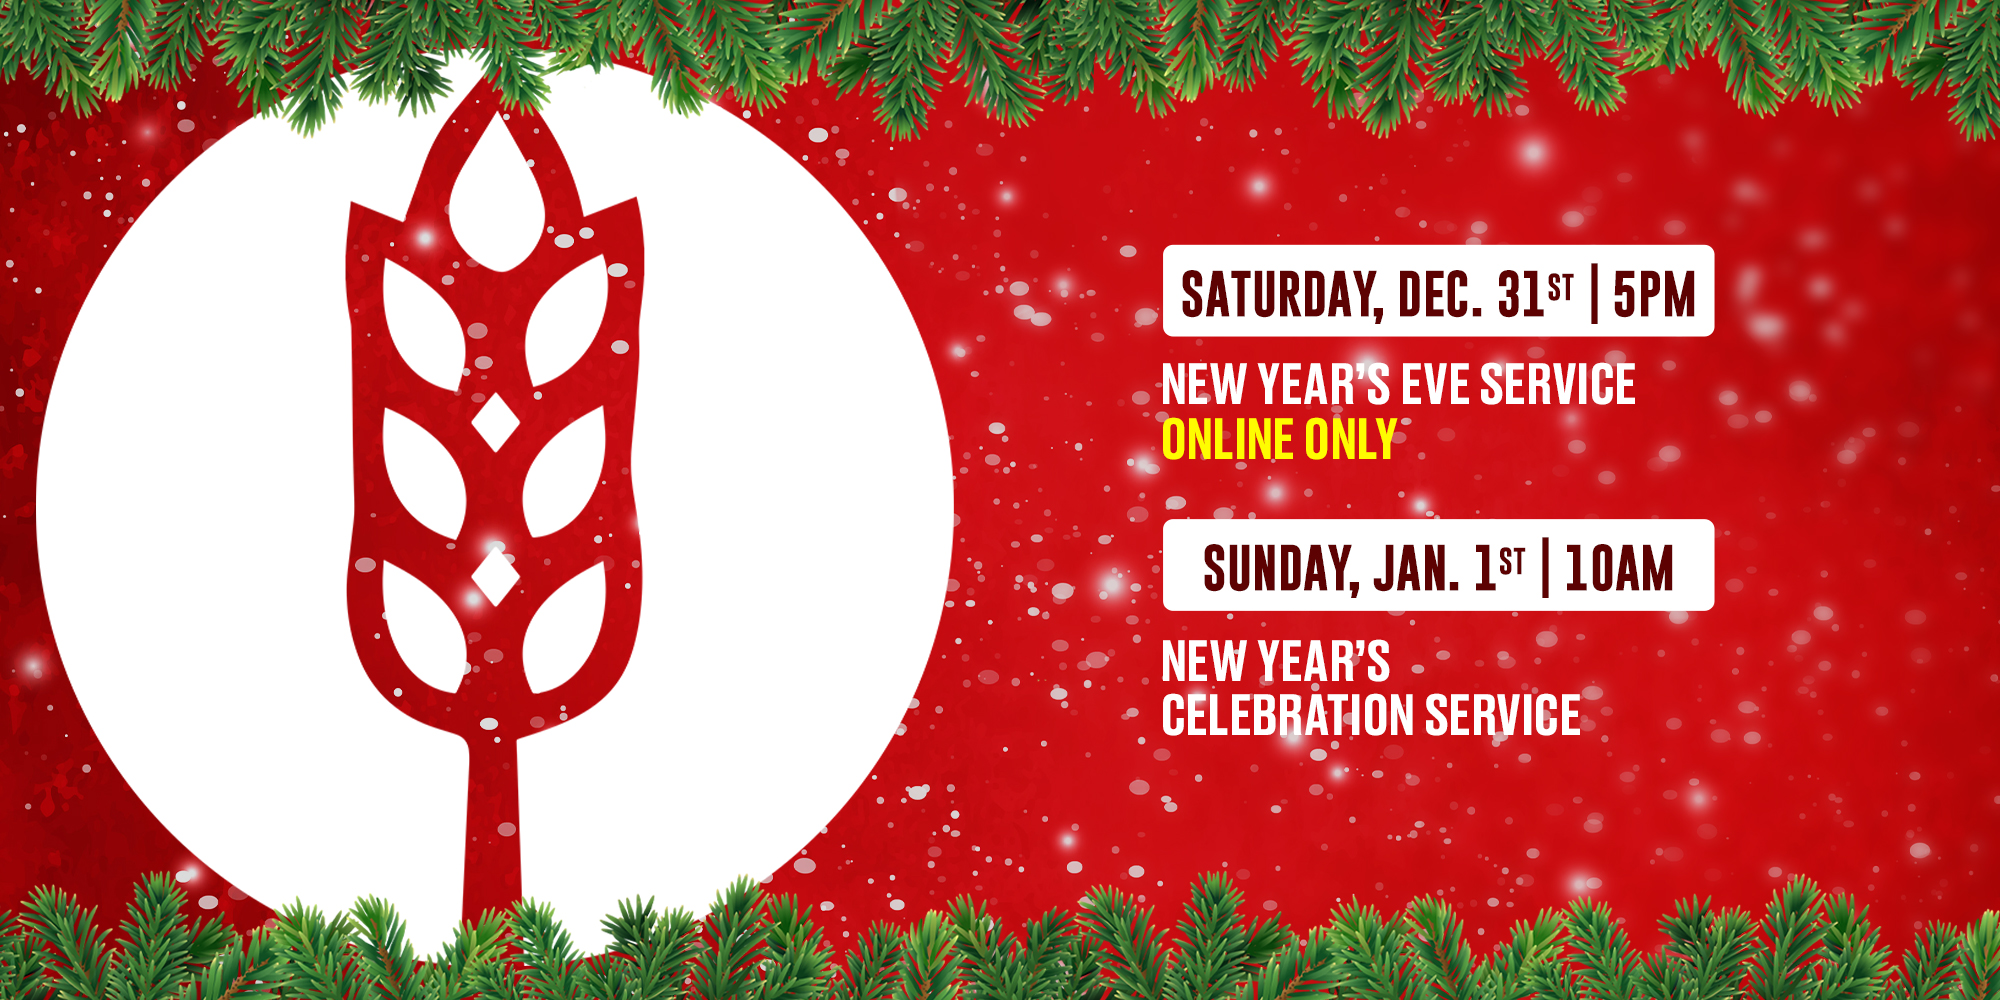 Saturday, Dec. 31st 7pm New Year's Eve Service Online Only Sunday, Jan. 1st 10am Worship Service